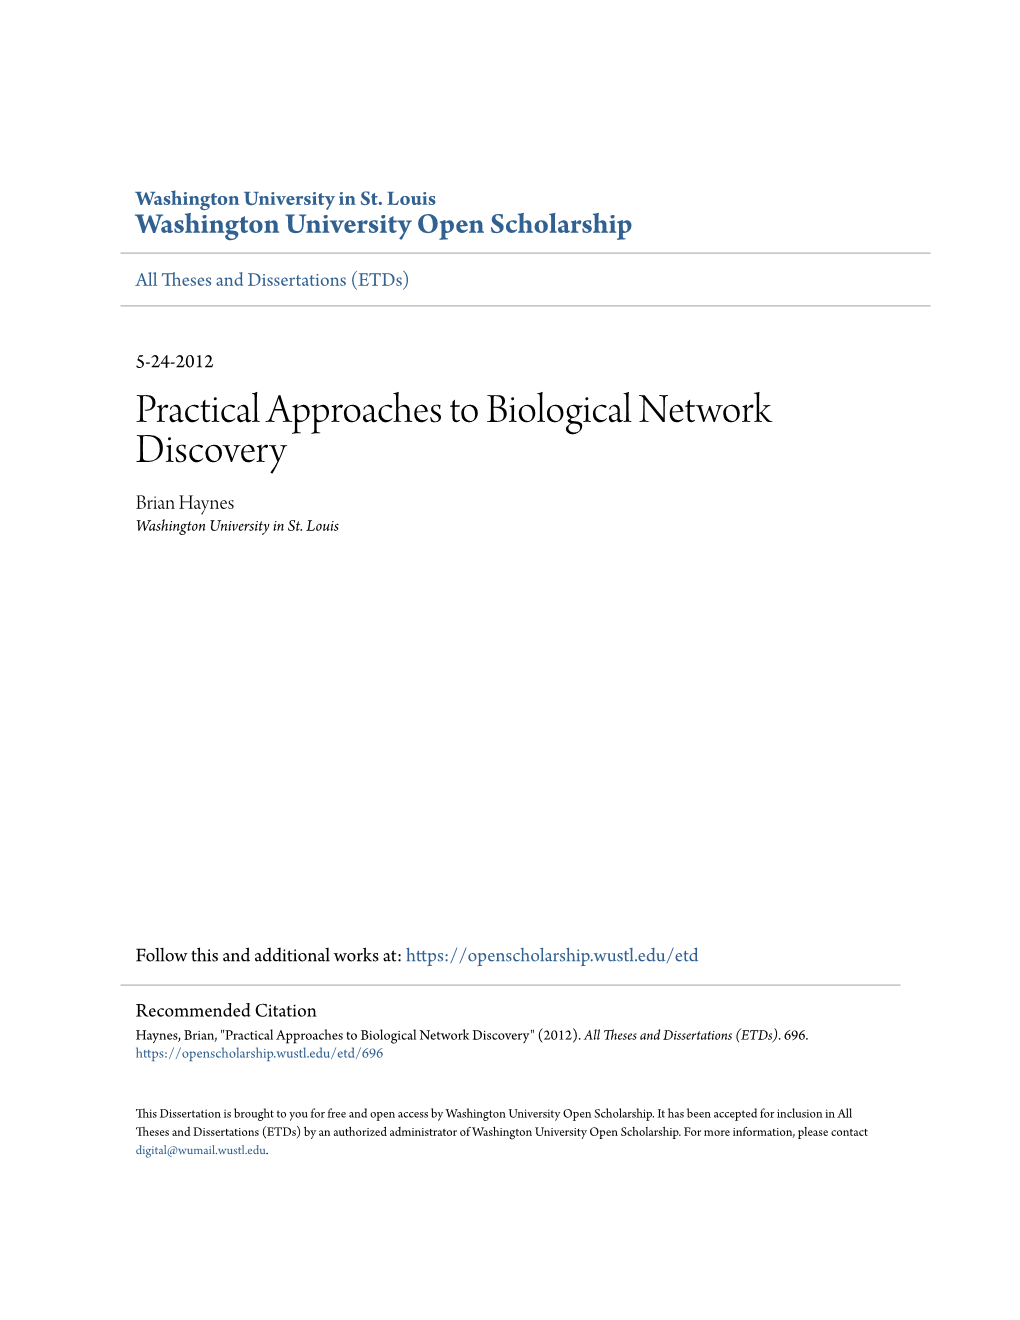 Practical Approaches to Biological Network Discovery Brian Haynes Washington University in St